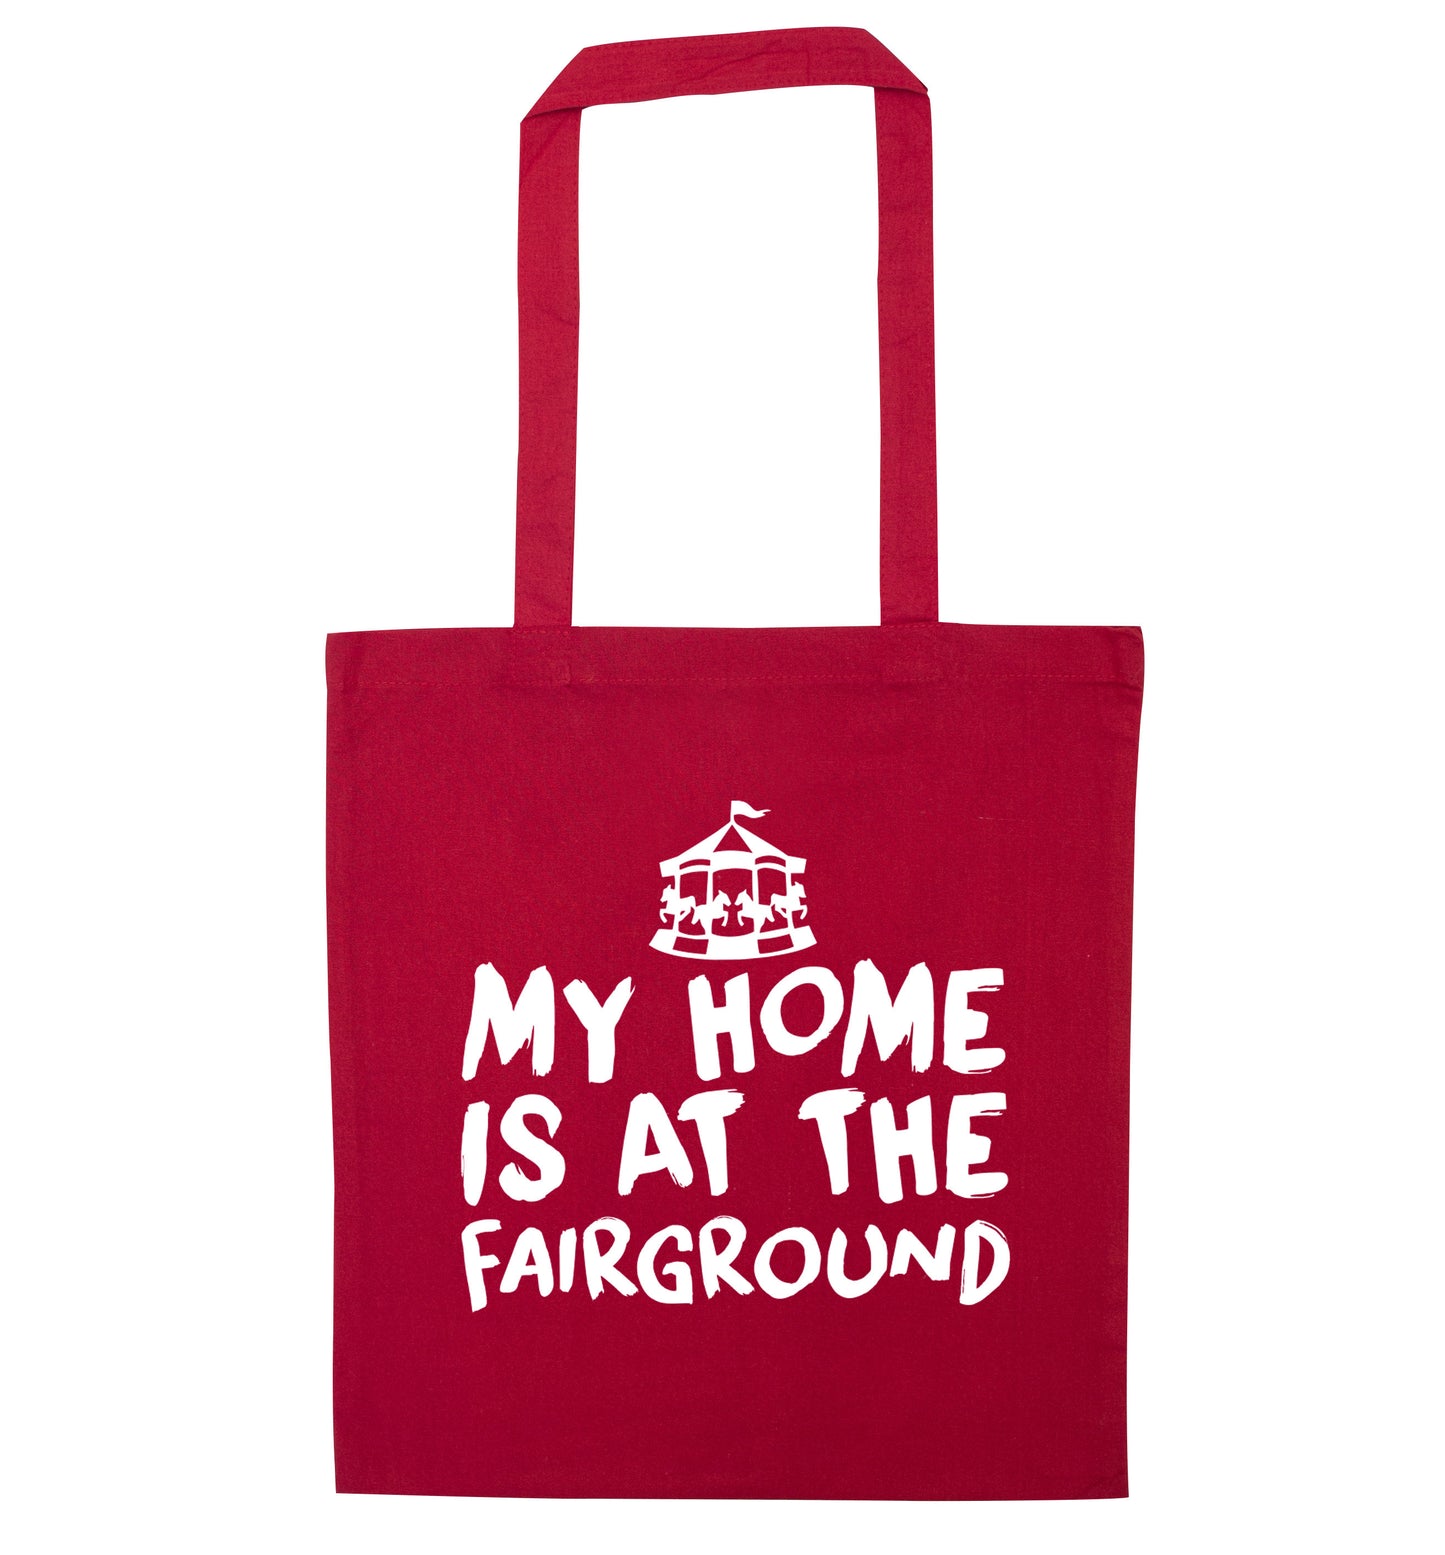 My home is at the fairground red tote bag